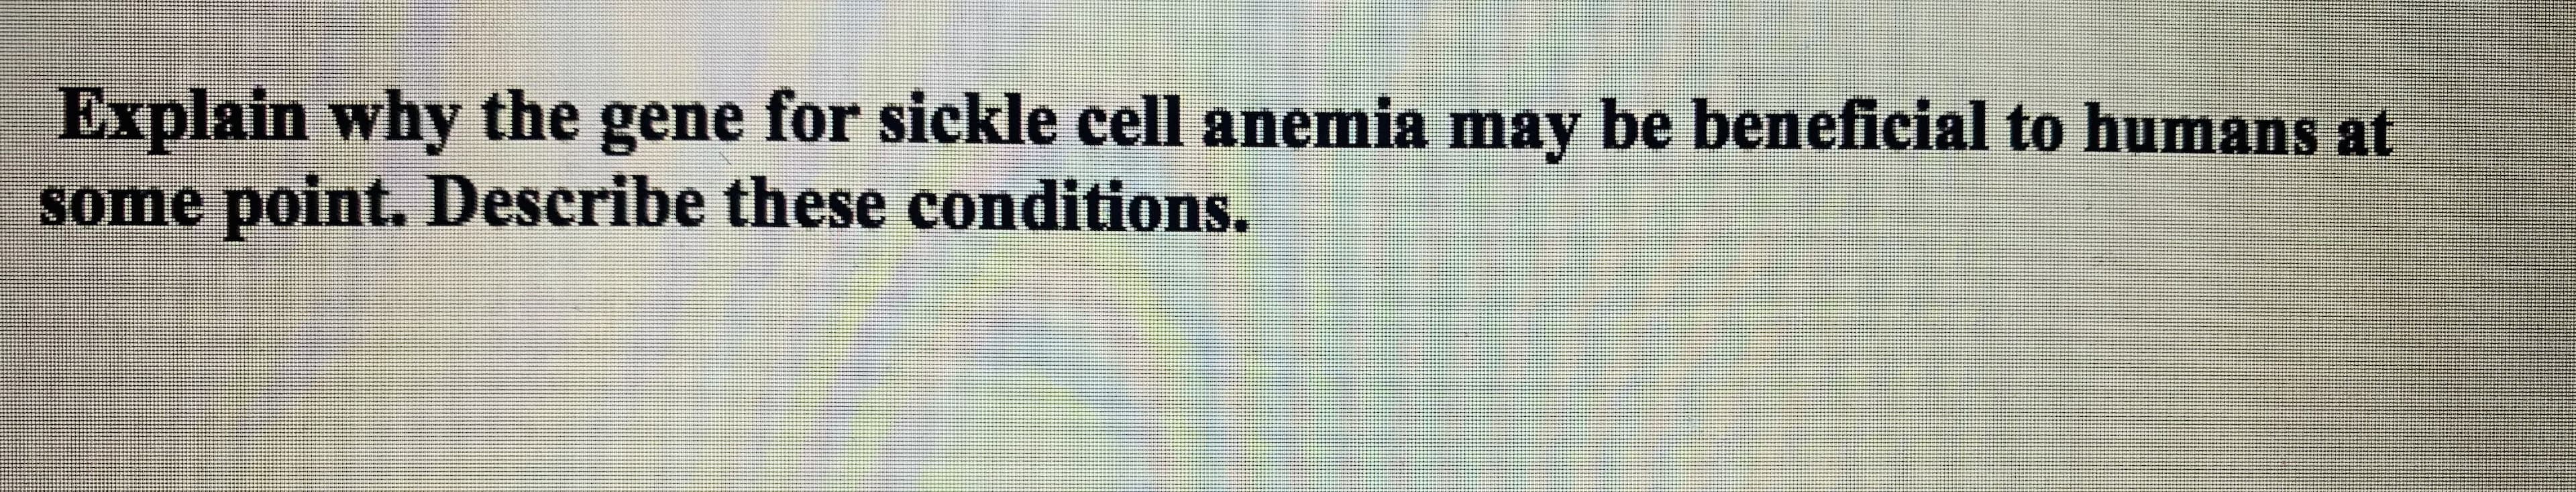 Explain why the gene for sickle cell anemia may be beneficial to humans at
some point. Describe these conditions.
